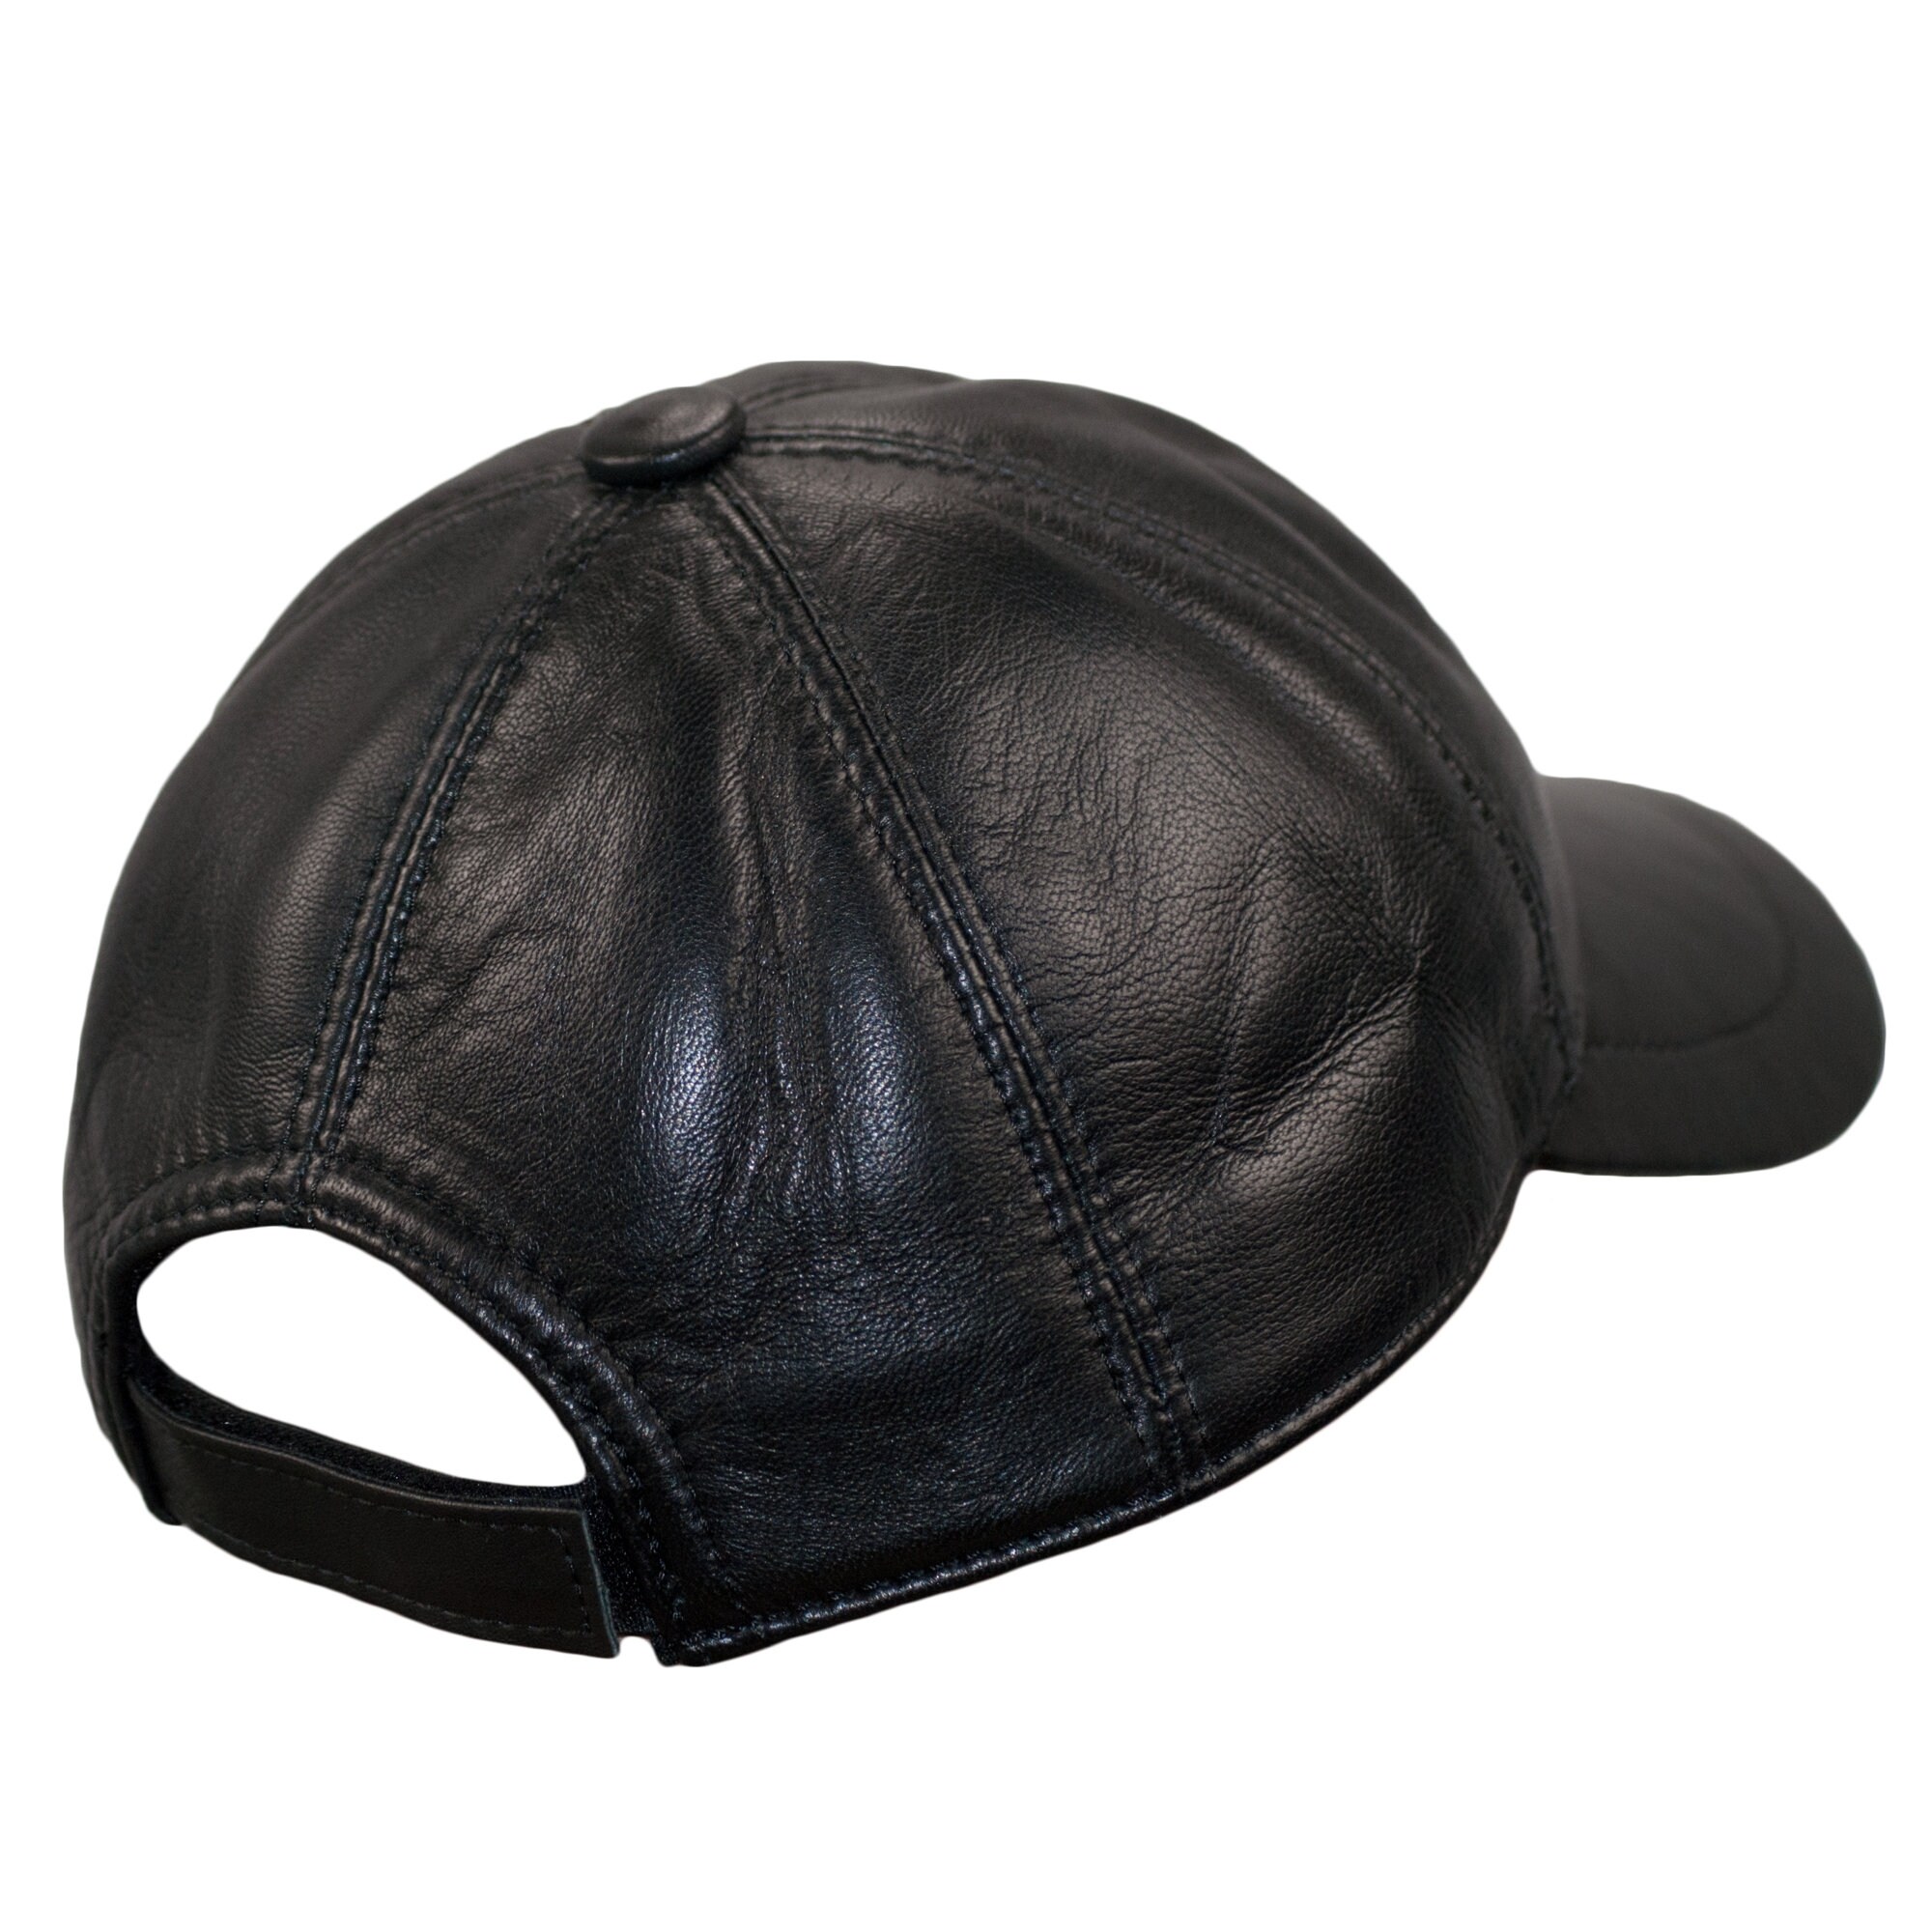 Buy Men's Leather Baseball Cap (Pack Of 1) (GR-YL-JAALI-CAP-P_Black_Free  Size) at